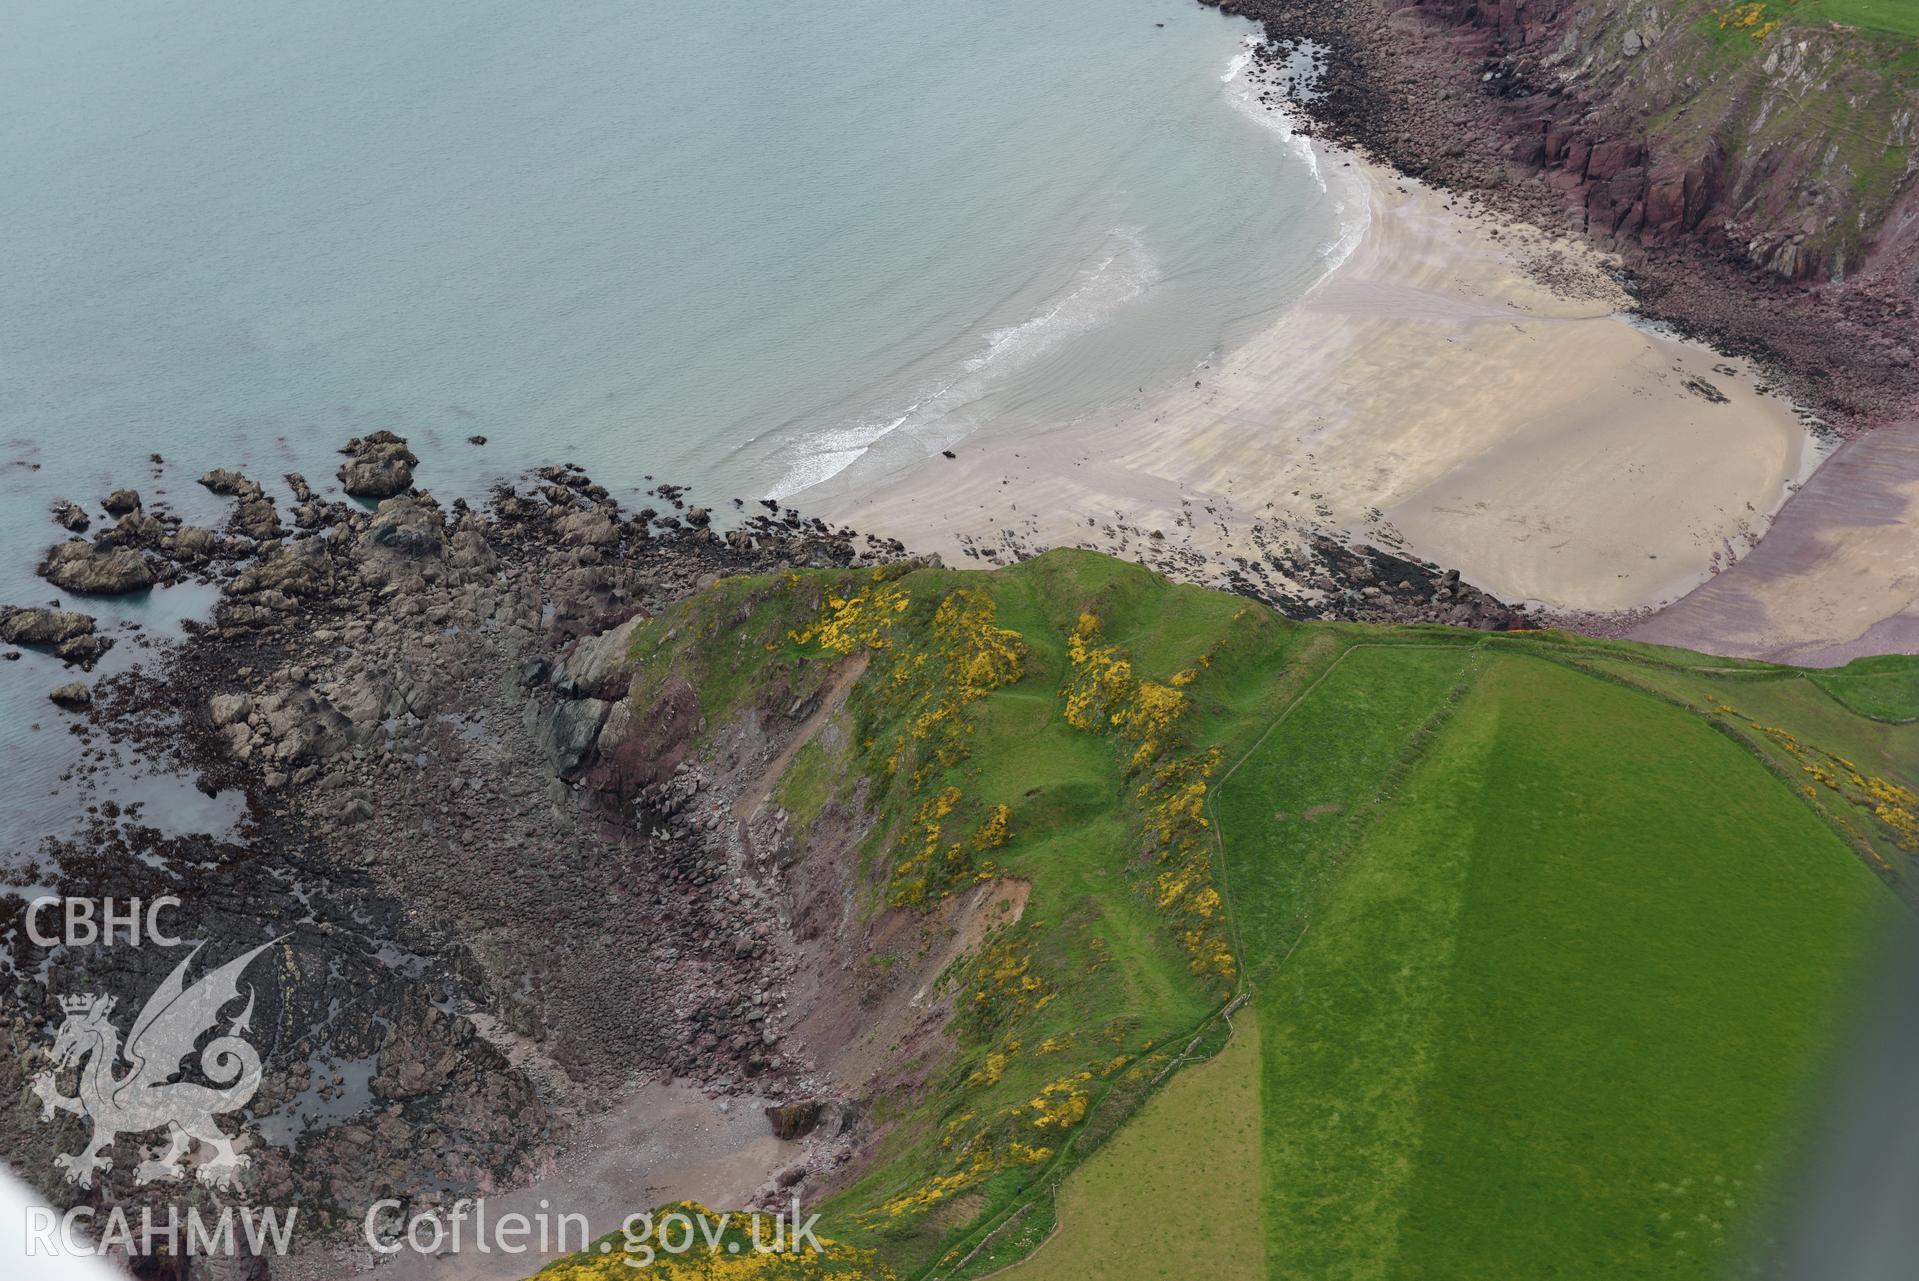 Great Castle Head, Dale. Baseline aerial reconnaissance survey for the CHERISH Project. ? Crown: CHERISH PROJECT 2017. Produced with EU funds through the Ireland Wales Co-operation Programme 2014-2020. All material made freely available through the Open Government Licence.